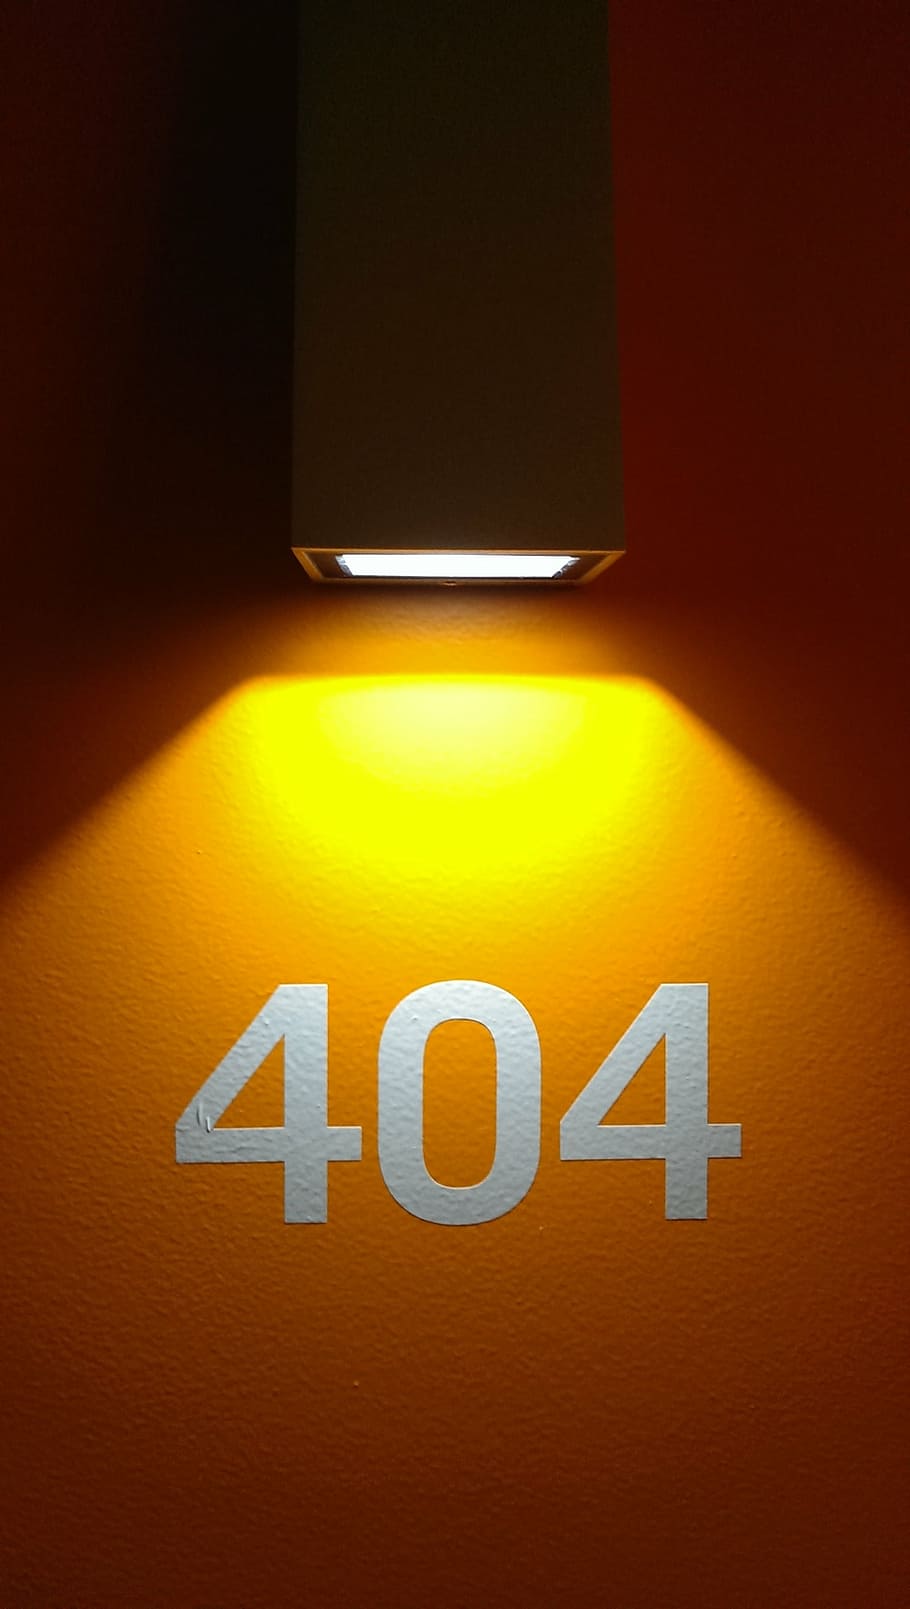 404 print, orange, wall, page not found, light, shadow, hotel, palindrome, room number, 404